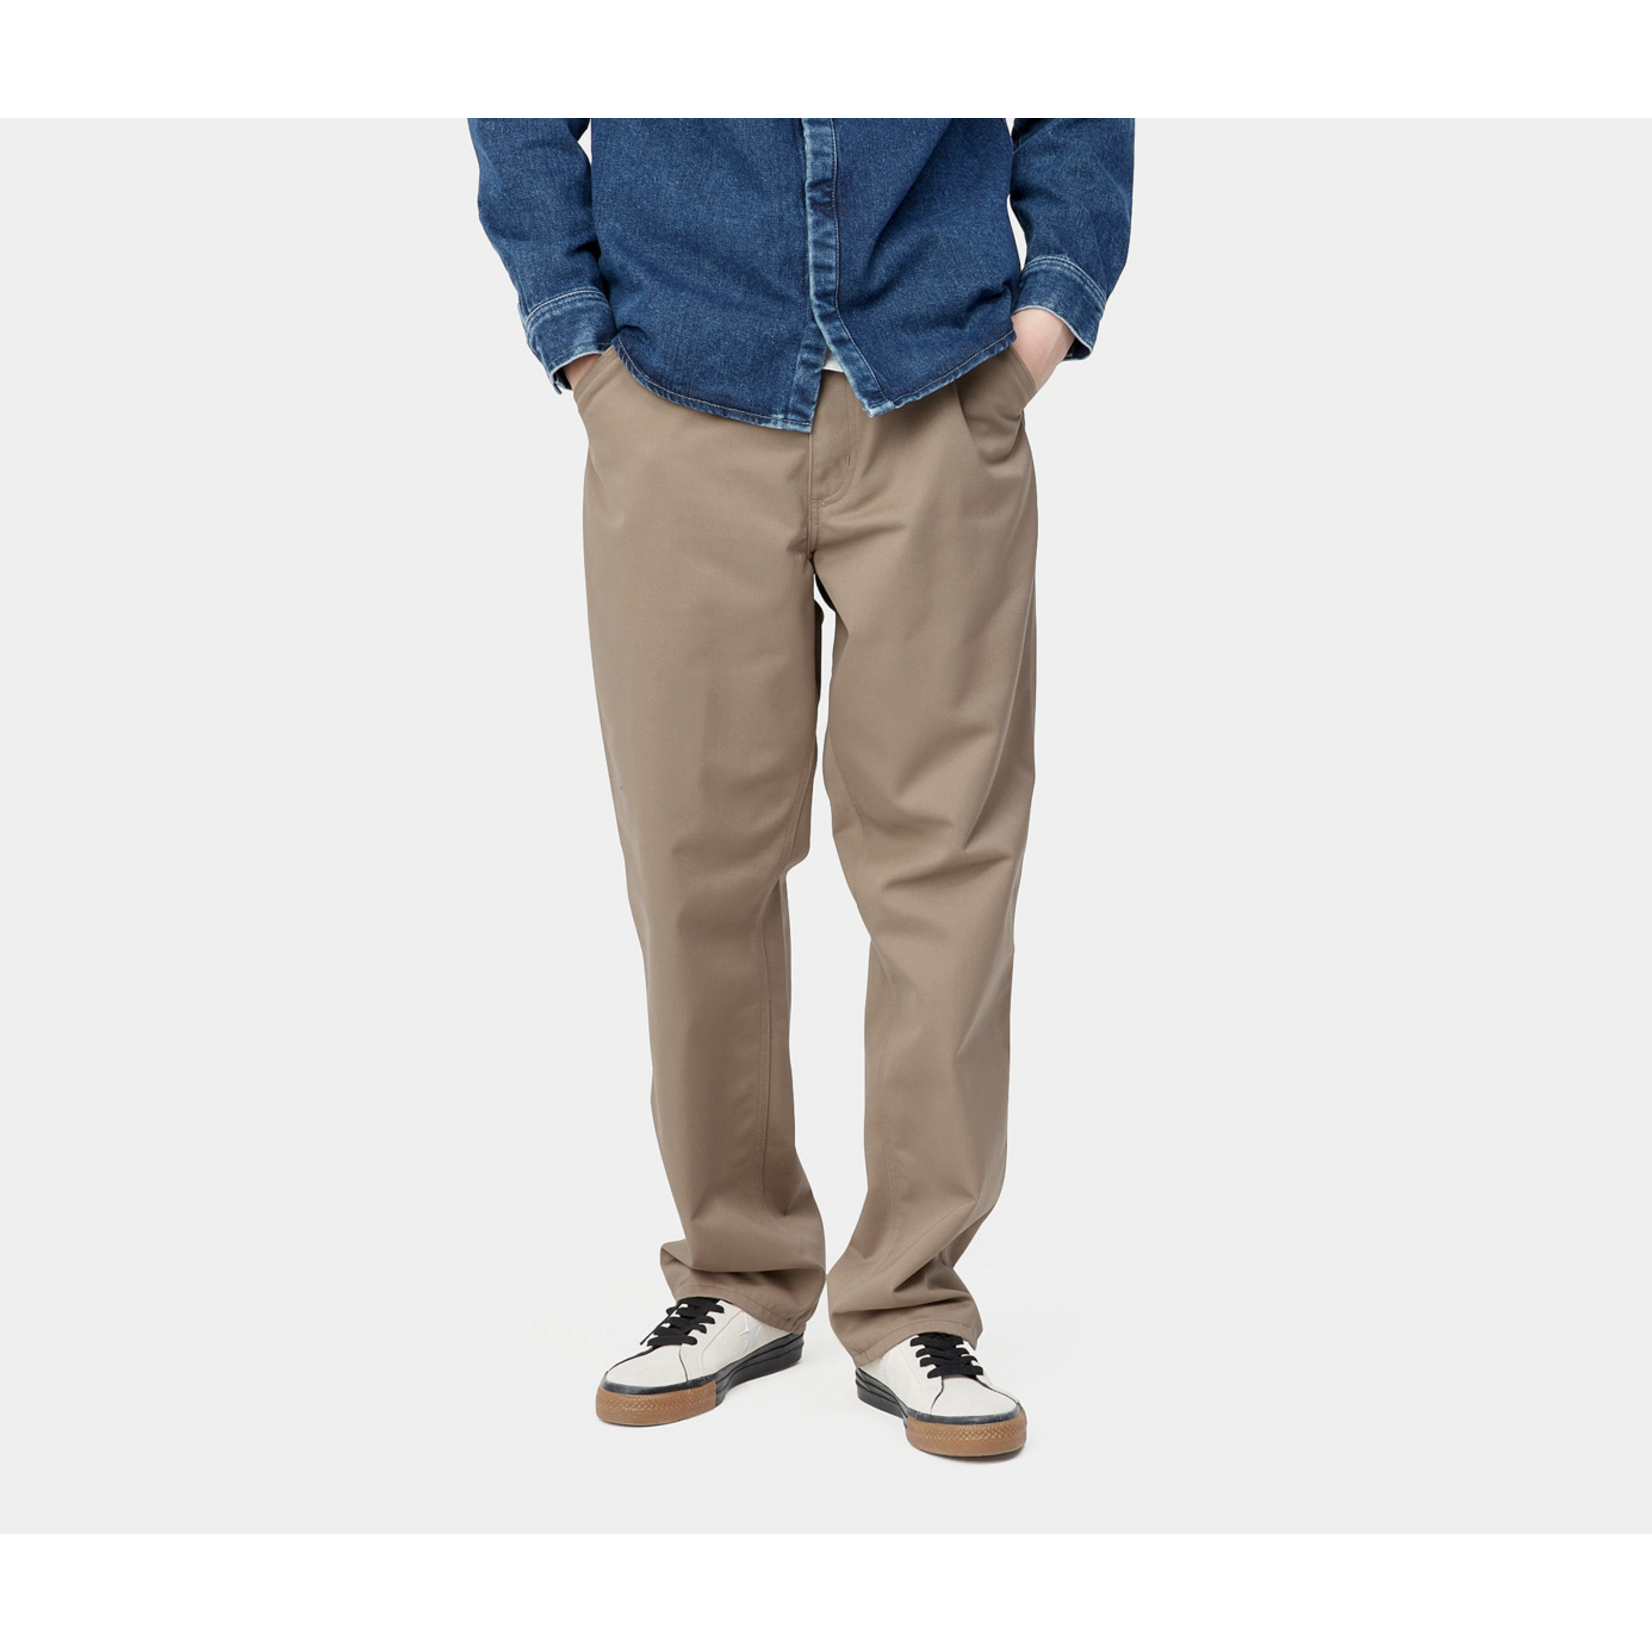 CARHARTT WIP SIMPLE PANT POLYESTER/COTTON L32